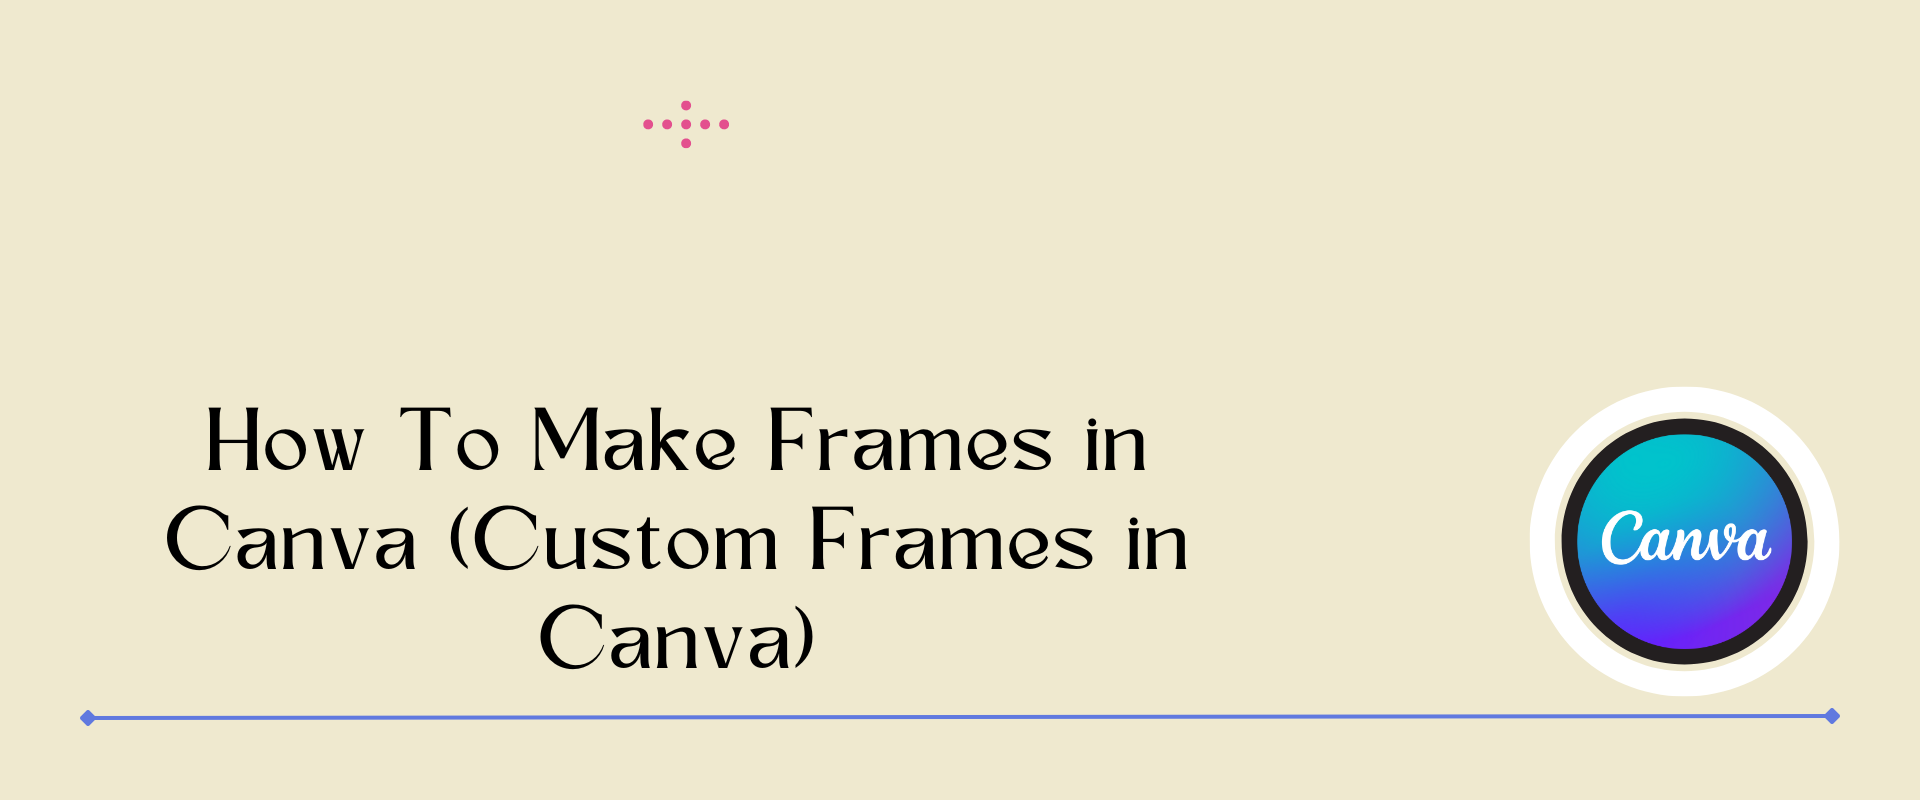 how to make frames in canva